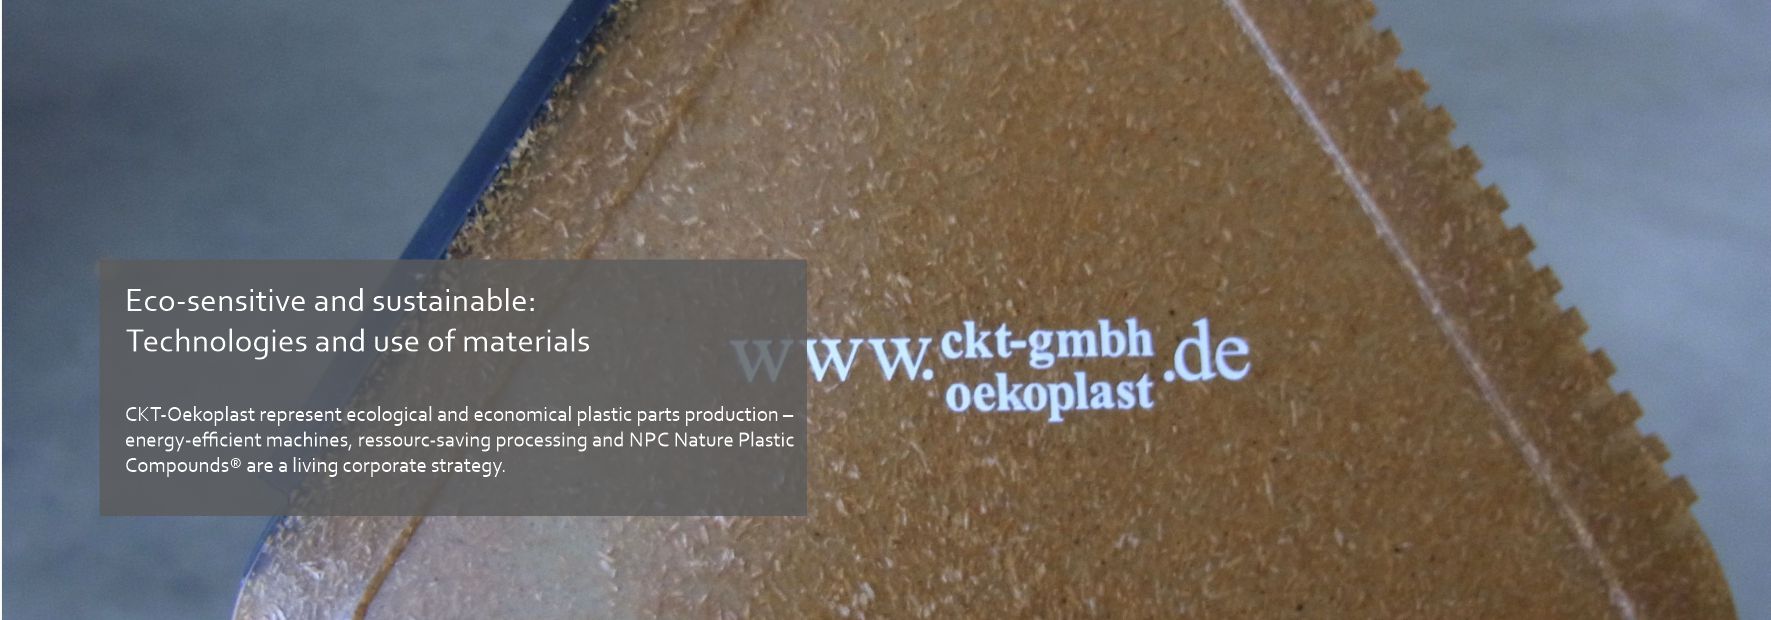 CKT-Oekoplast works environmentally-friendly and sustainable